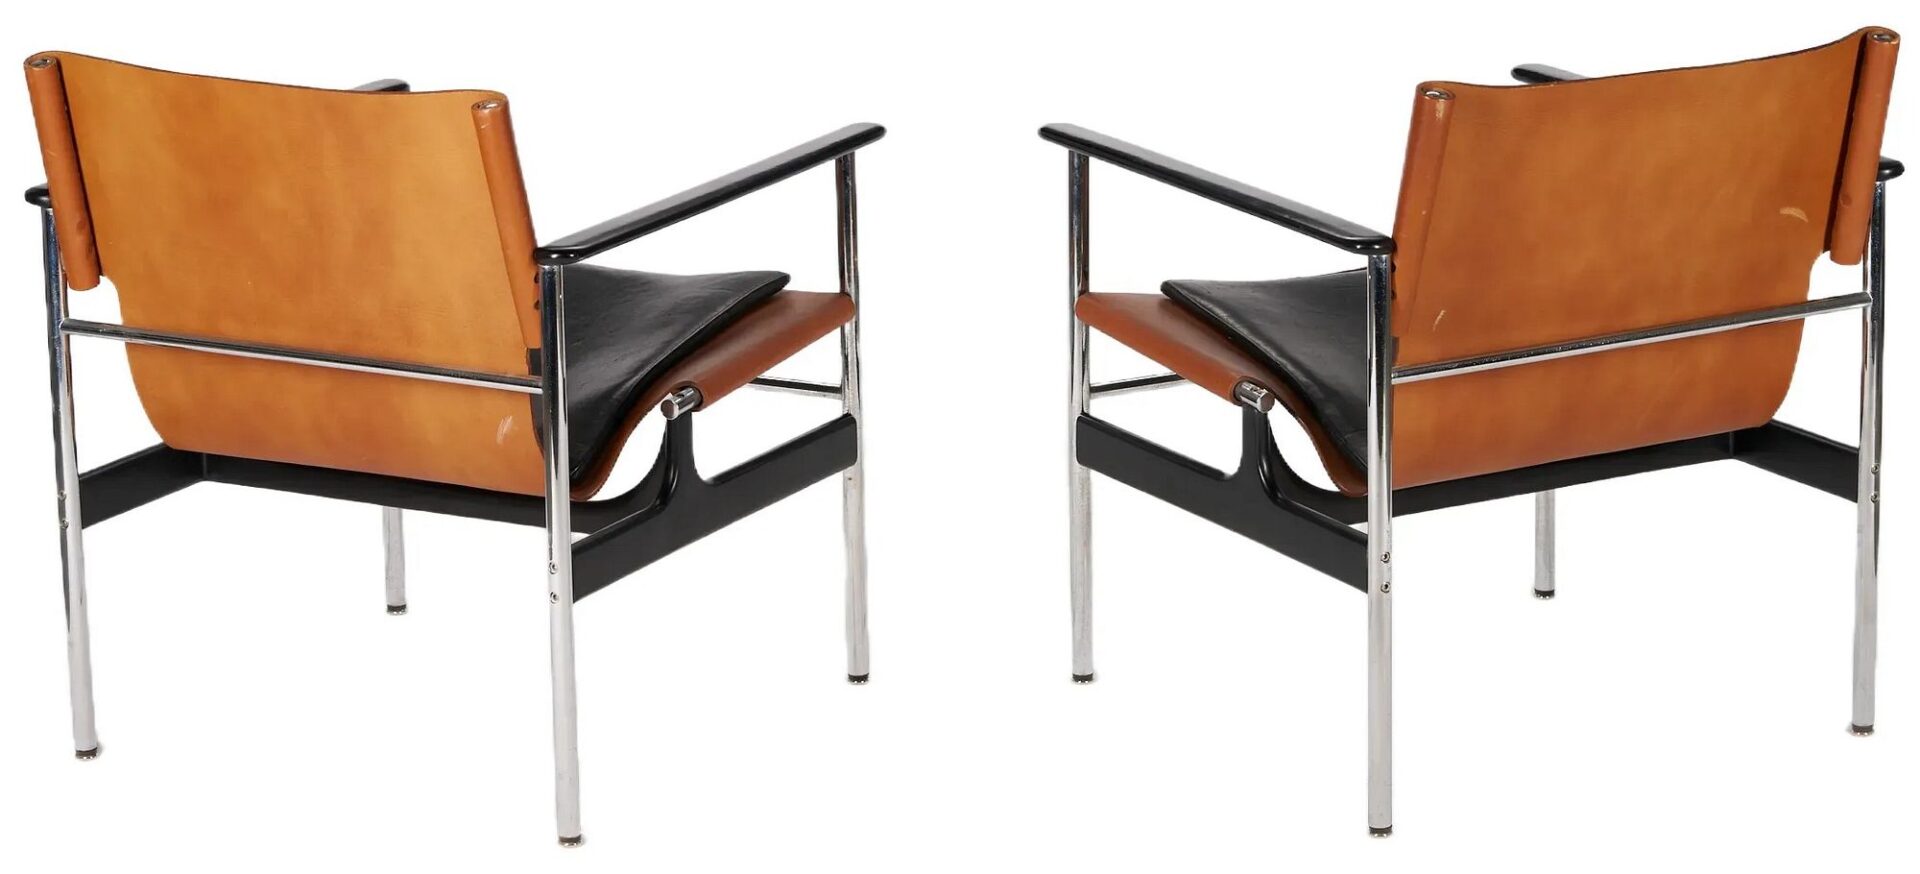 Lot 385: Pair of Chas. Pollock for Knoll Sling Chairs, c. 1965